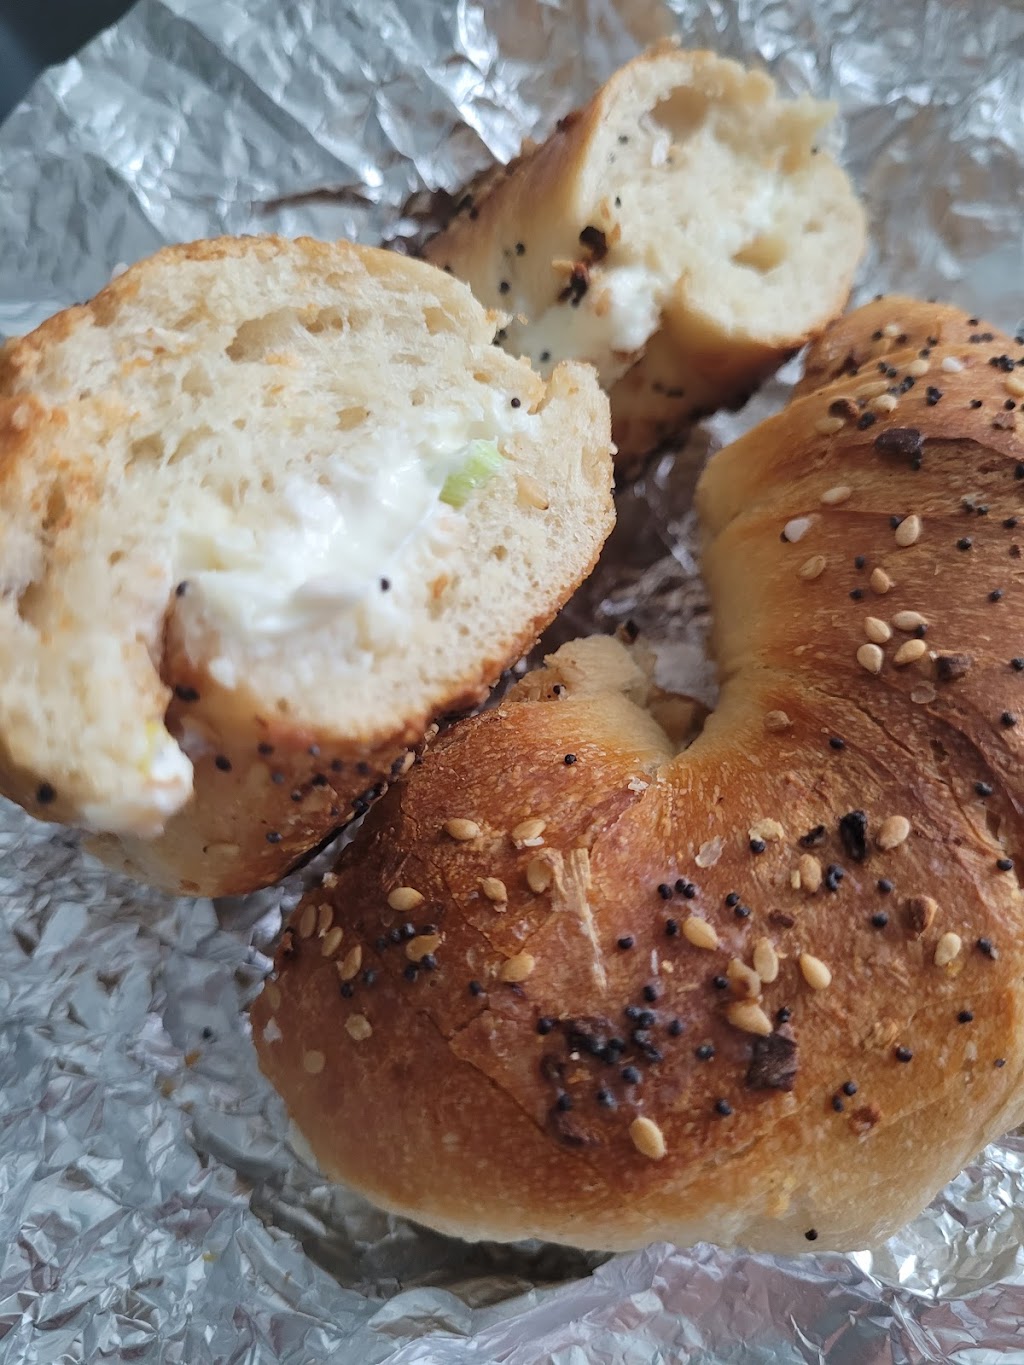 J&V bagels and deli | 1554 Paterson Plank Rd, Secaucus, NJ 07094 | Phone: (201) 330-0624